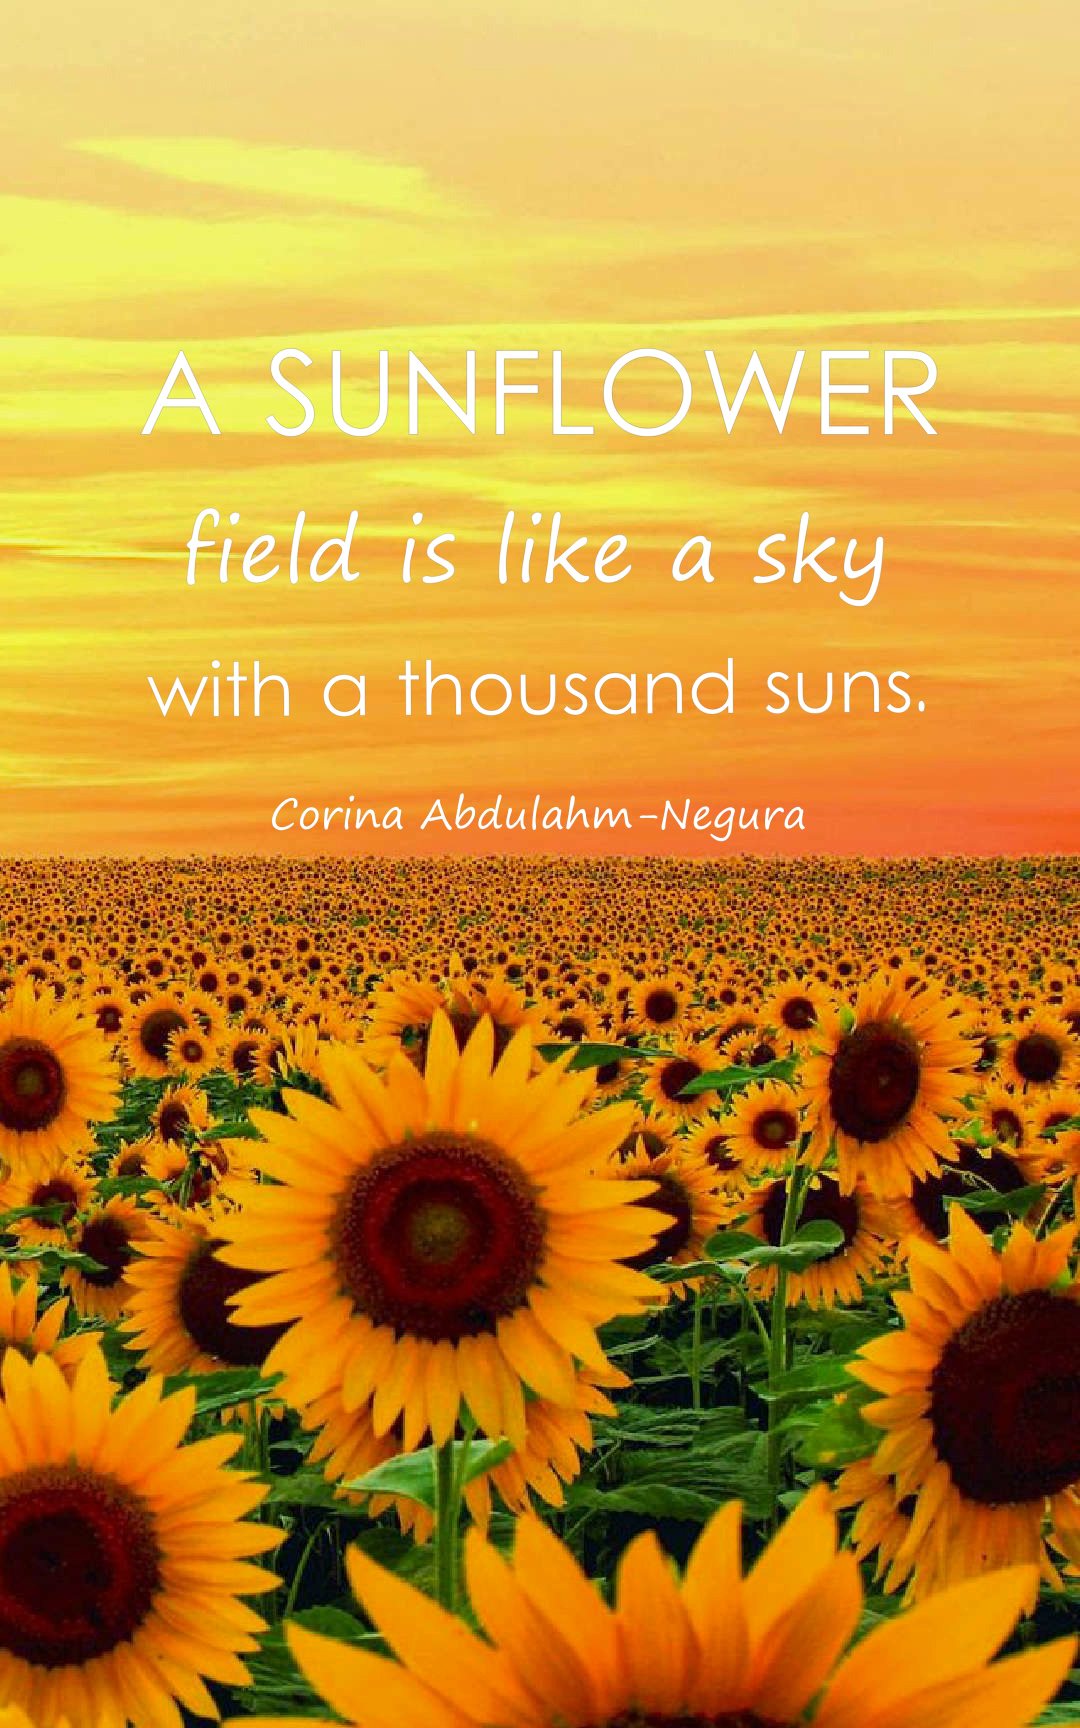 Beautiful Sunflower Quotes with Image